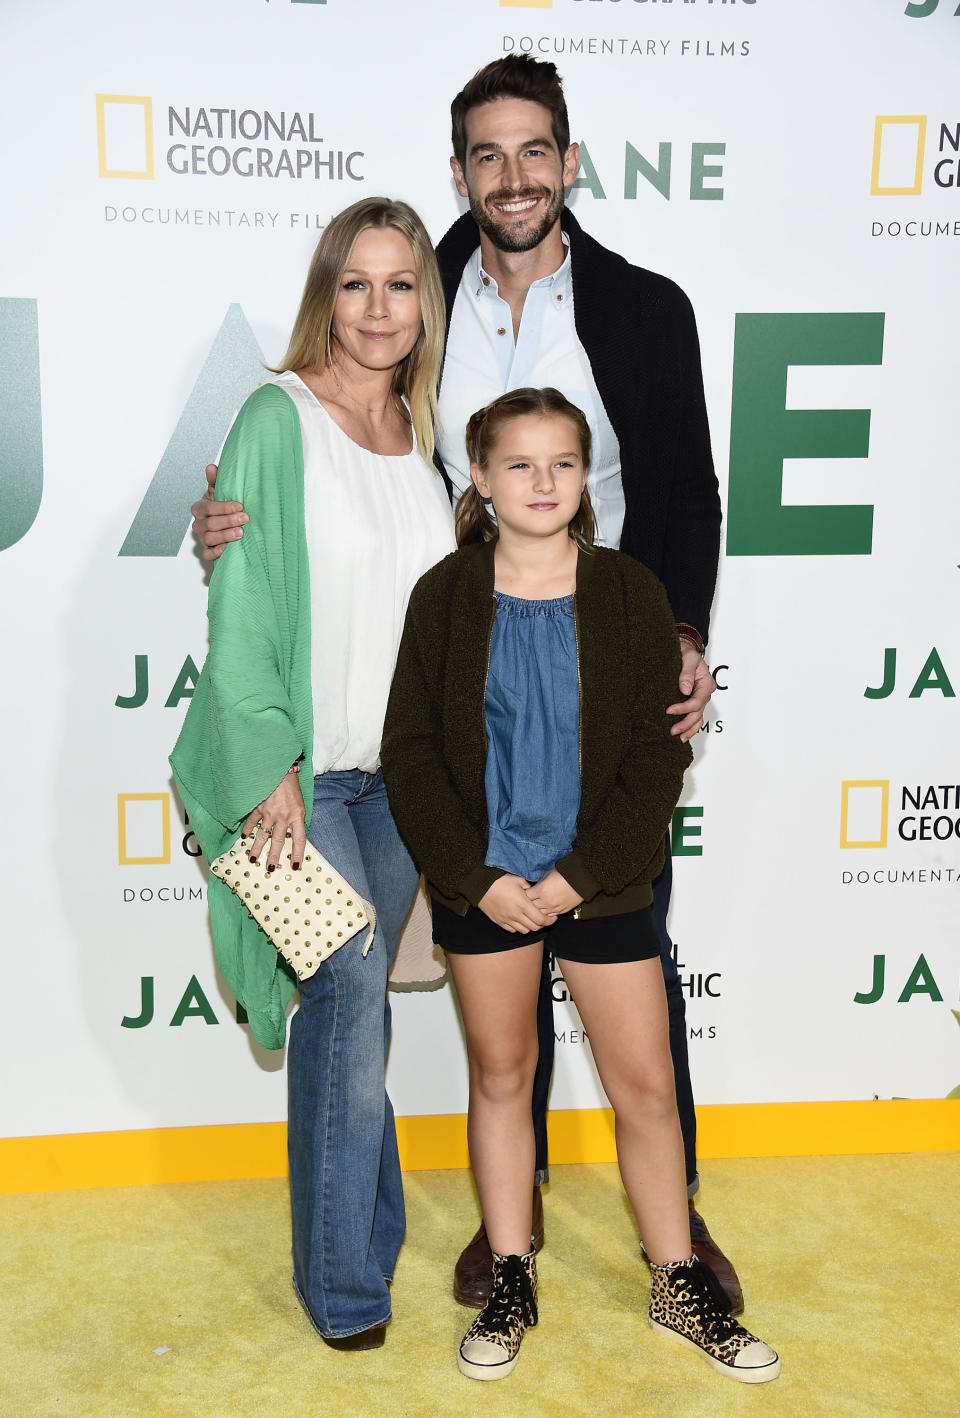 Jennie Garth, Dave Abrams, and Fiona Facinelli arrive at the premiere of National Geographic Documentary Films’ <em>Jane</em> at the Hollywood Bowl on Oct. 9, 2017. (Photo: Amanda Edwards/WireImage)